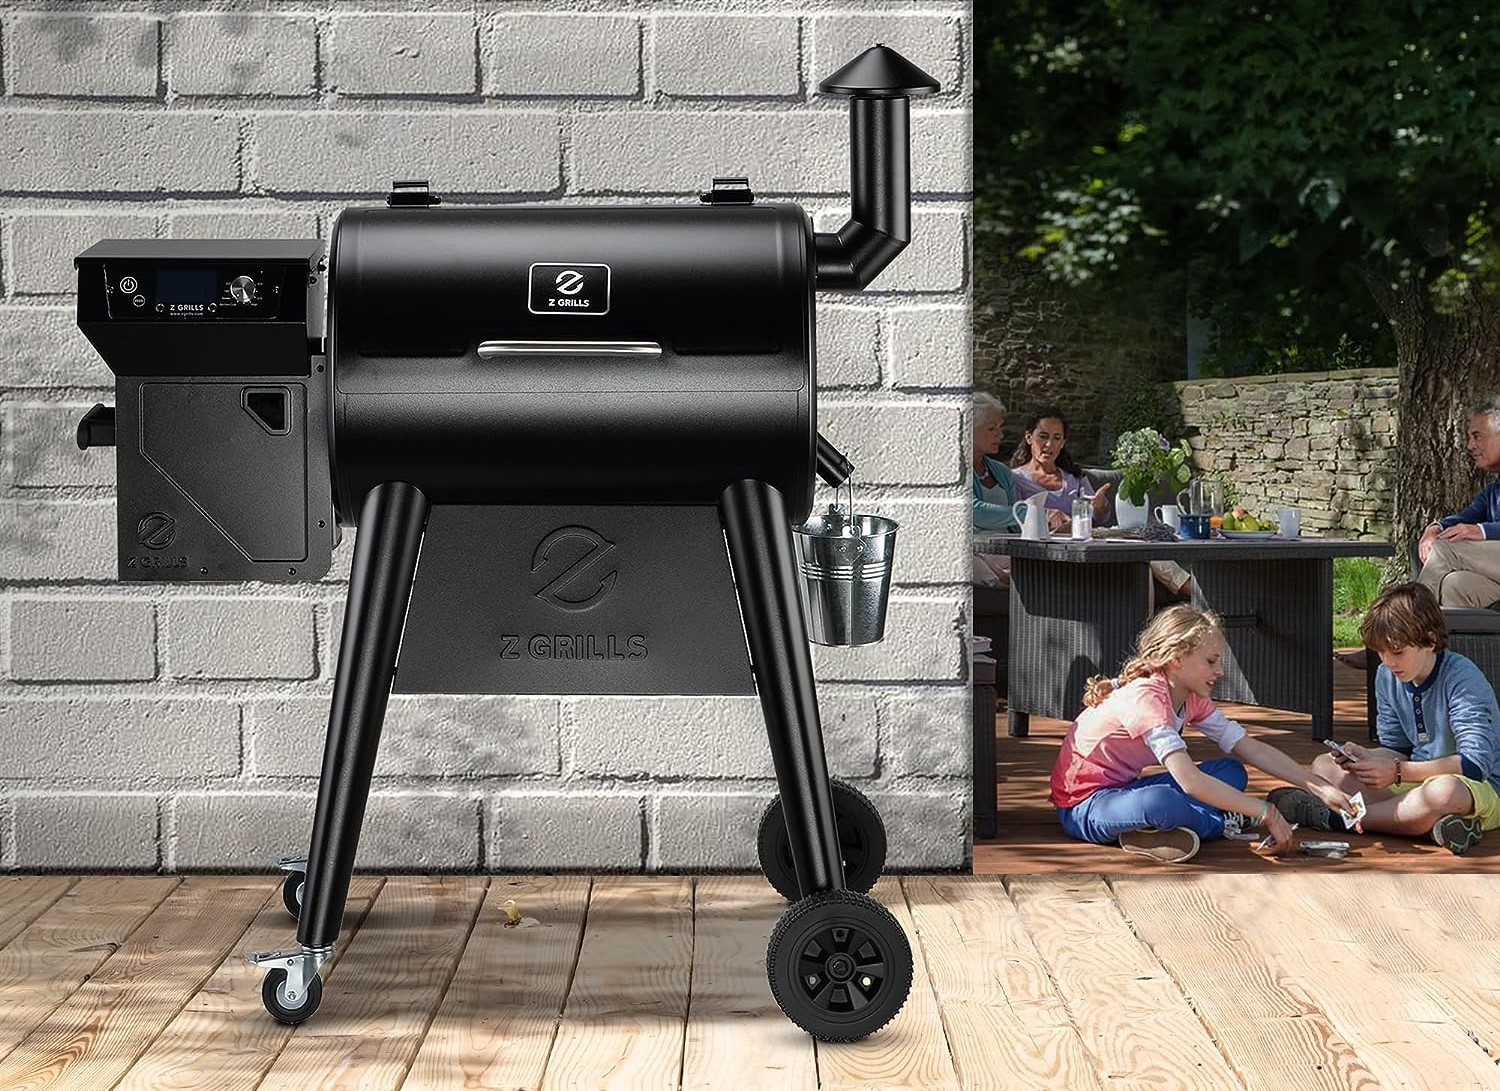 Z Grills 450B Pellet Grill (Review & Analysis)